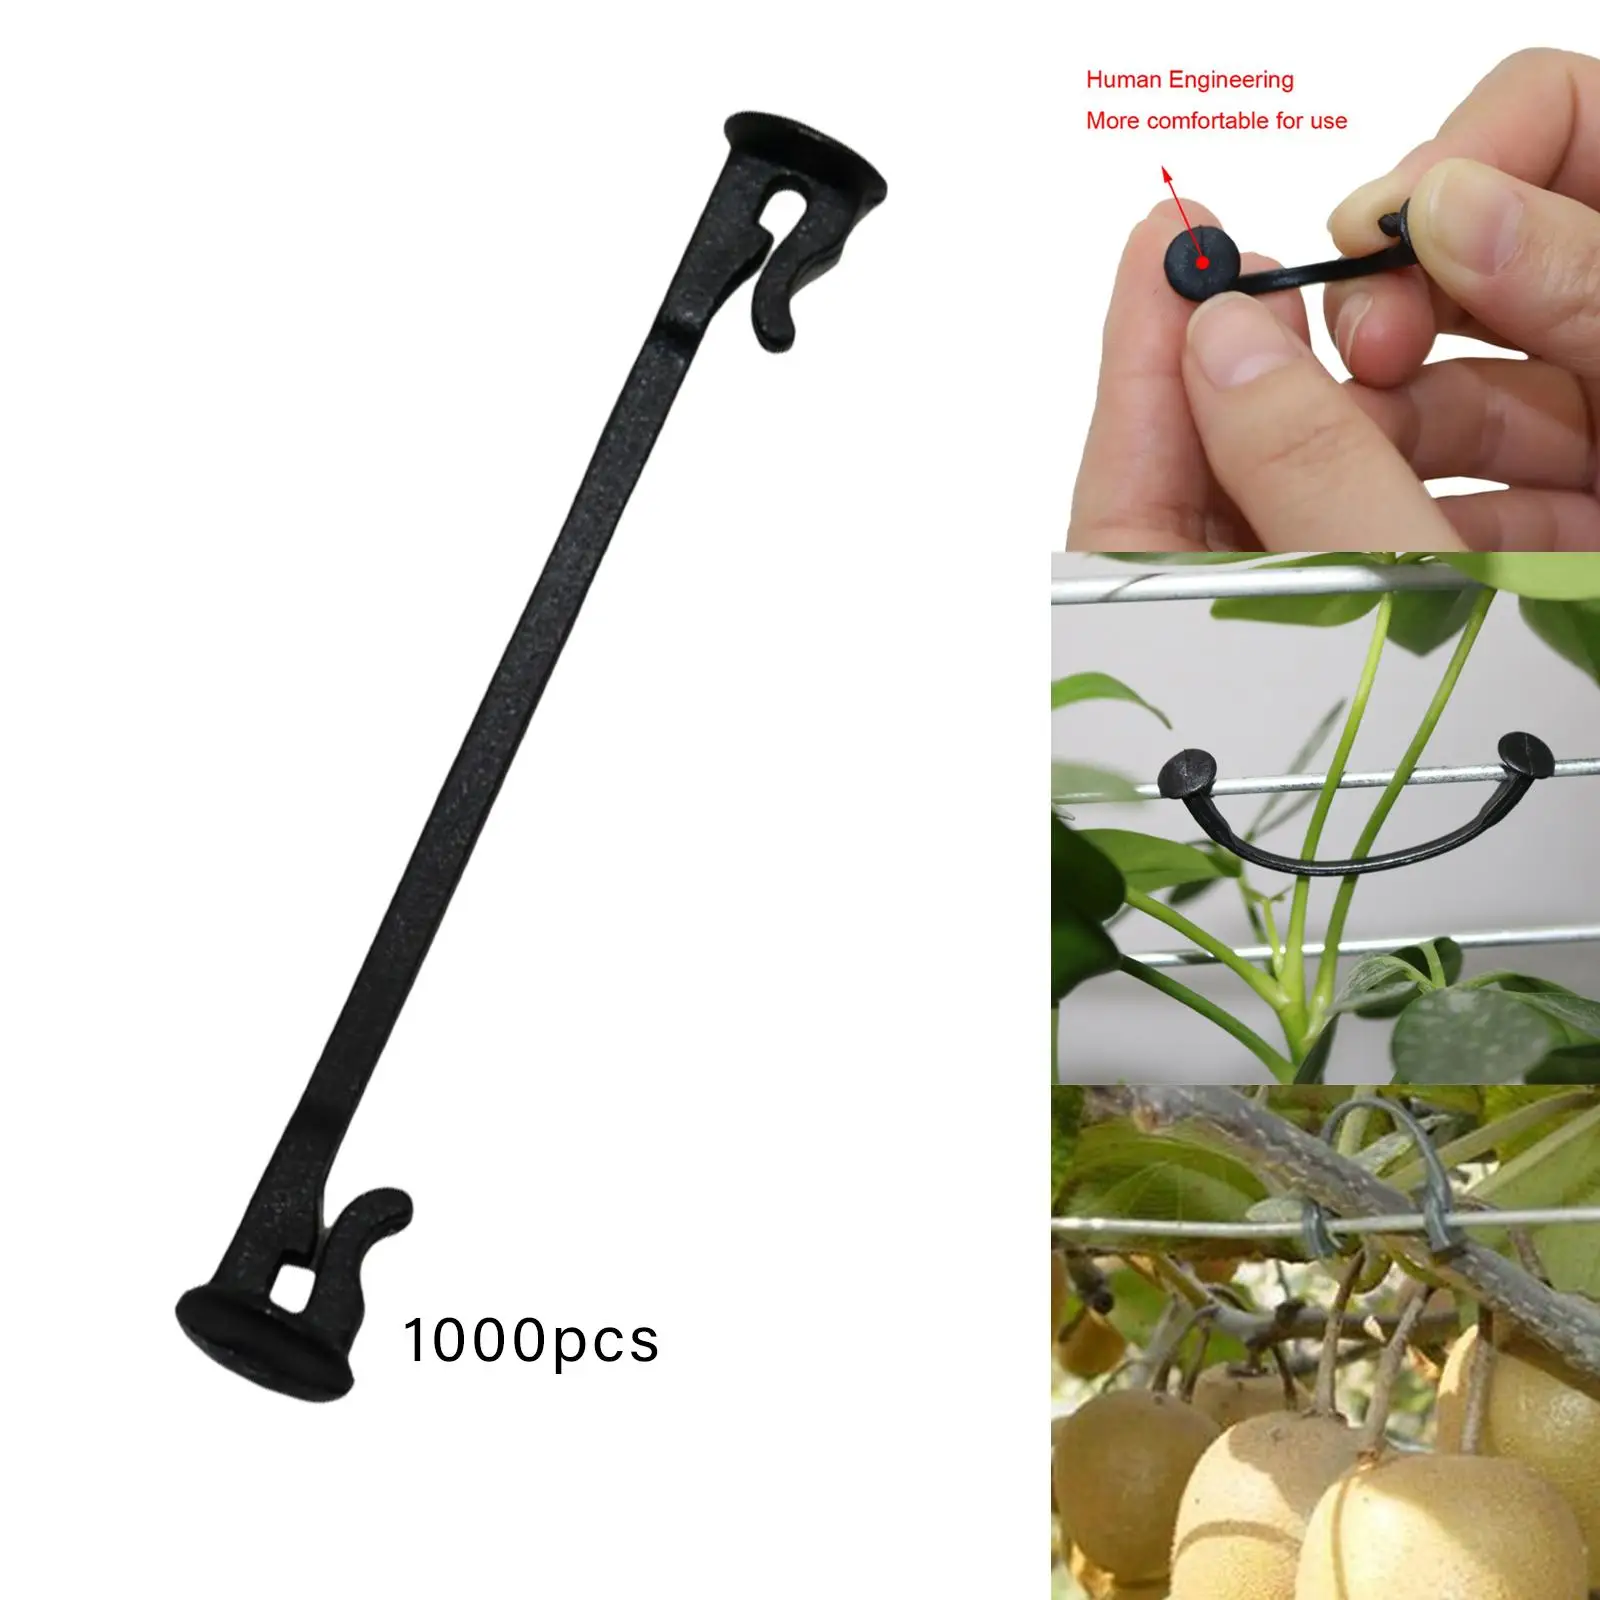 Plant Fixture Clips Gardening Supplies Plant Clips for Climbing for Flower Fruit Tree Nursery